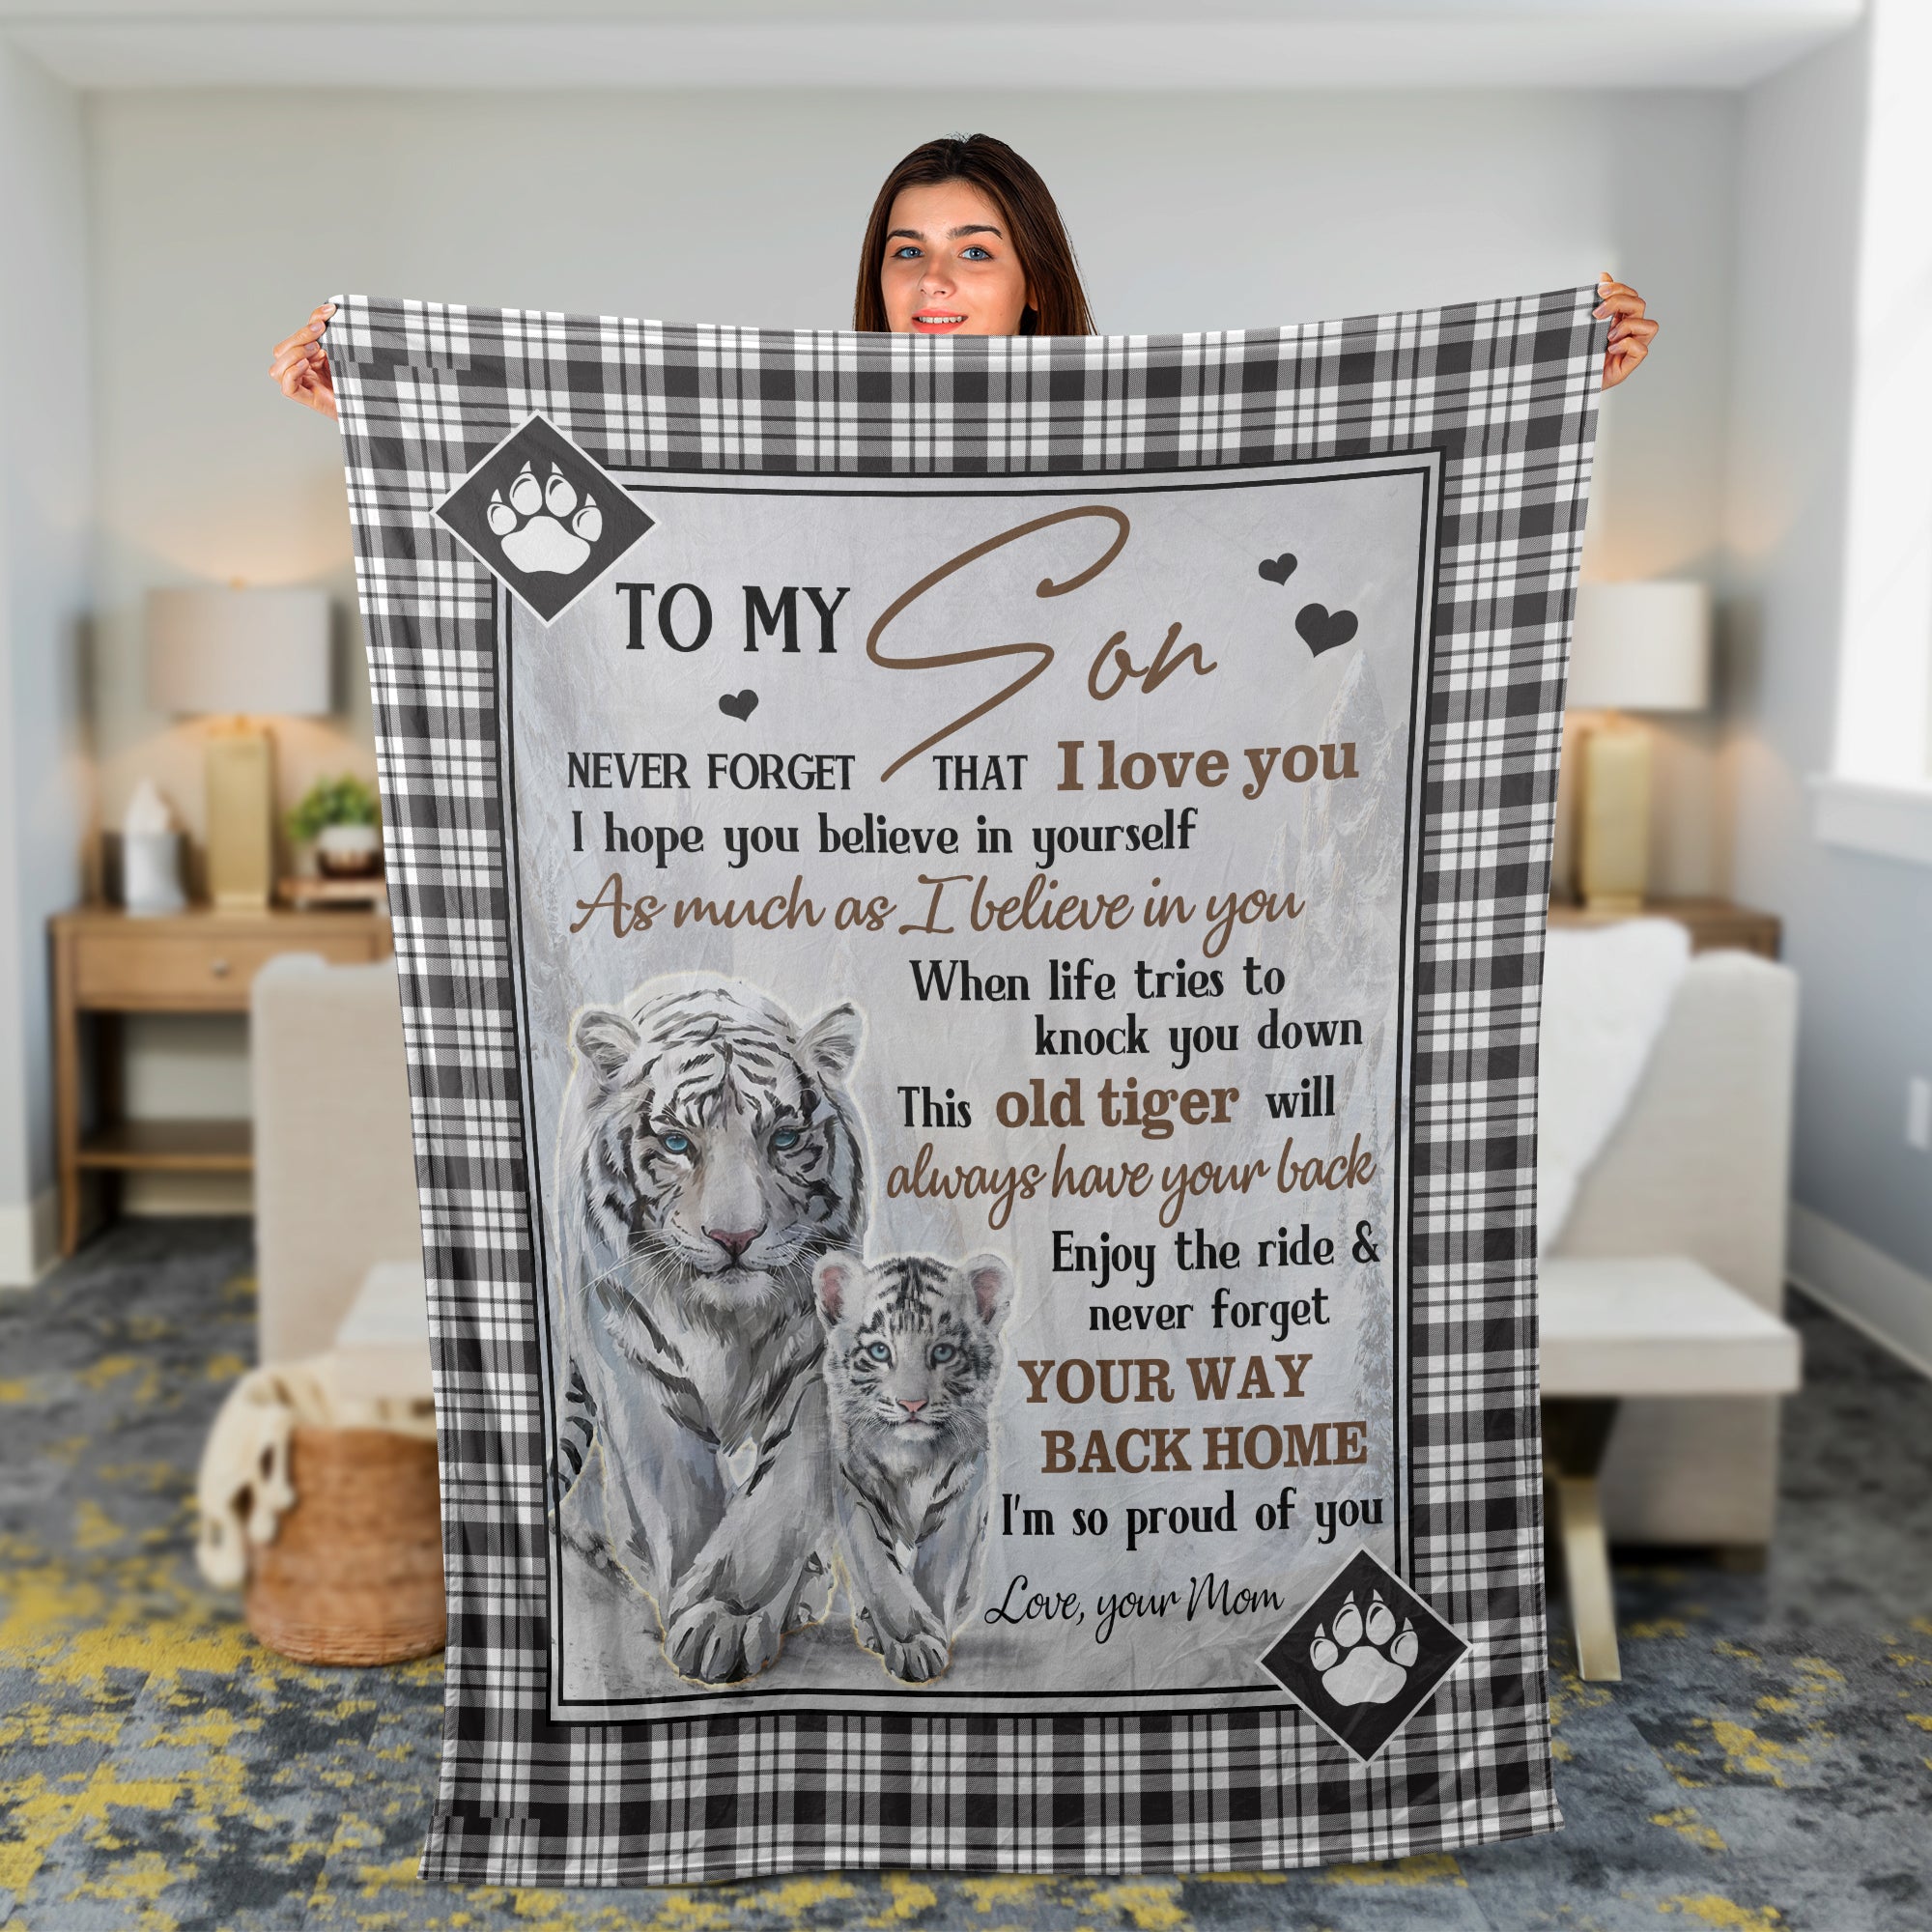 Family Blanket, Son And Mom Blanket - Gifts For Son From Mom - Mom To Son Blanket, Beautiful White Tiger And Her Cup